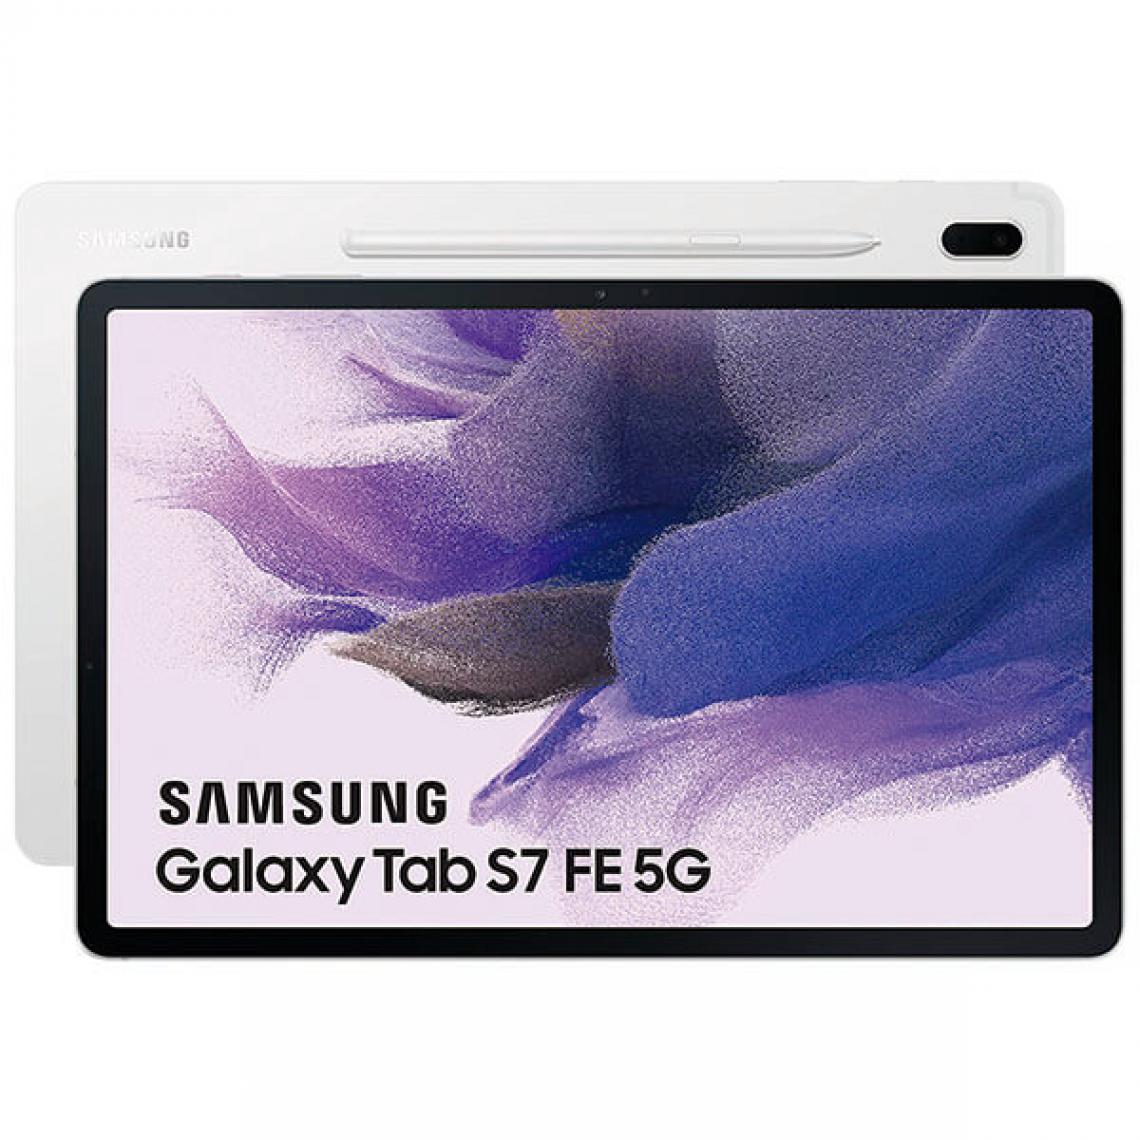 Samsung - Samsung Galaxy Tab S7 FE 5G 12.4" 4Go / 64Go Argent (Mystic Silver) T736 - Tablette Android